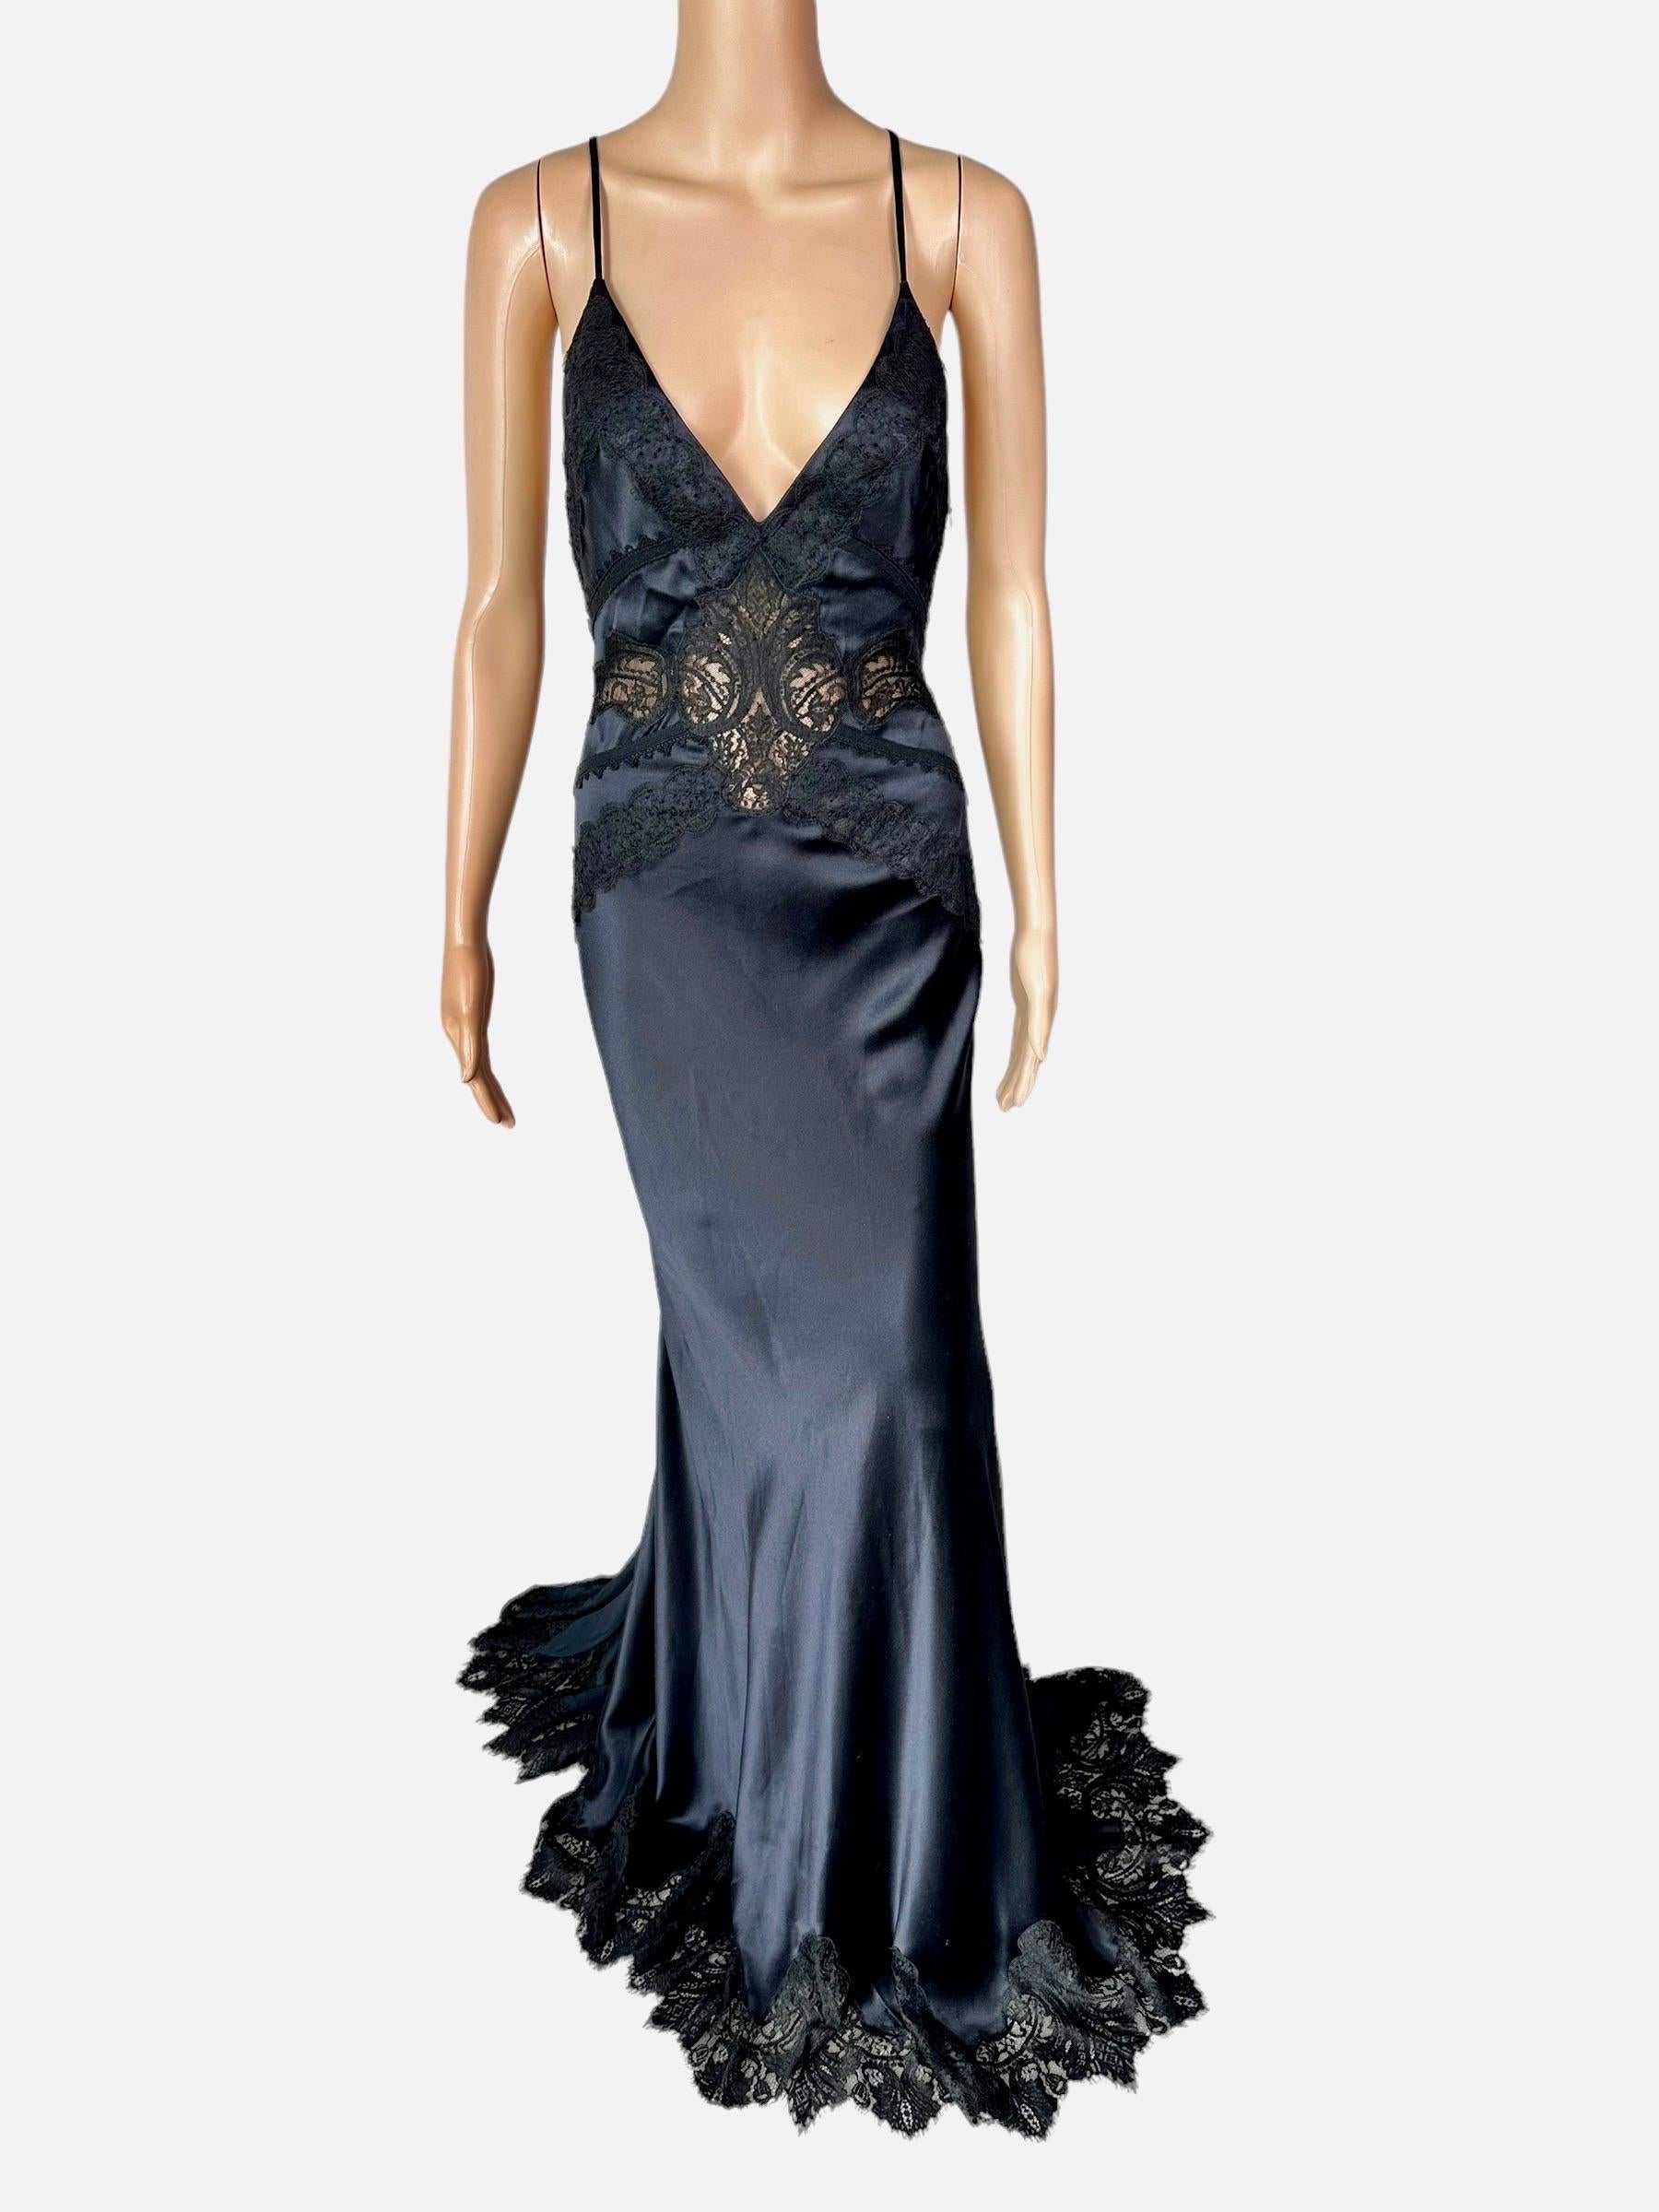 Versace c.2006 Plunging Neckline Sheer Lace Panels Backless Evening Dress Gown  4